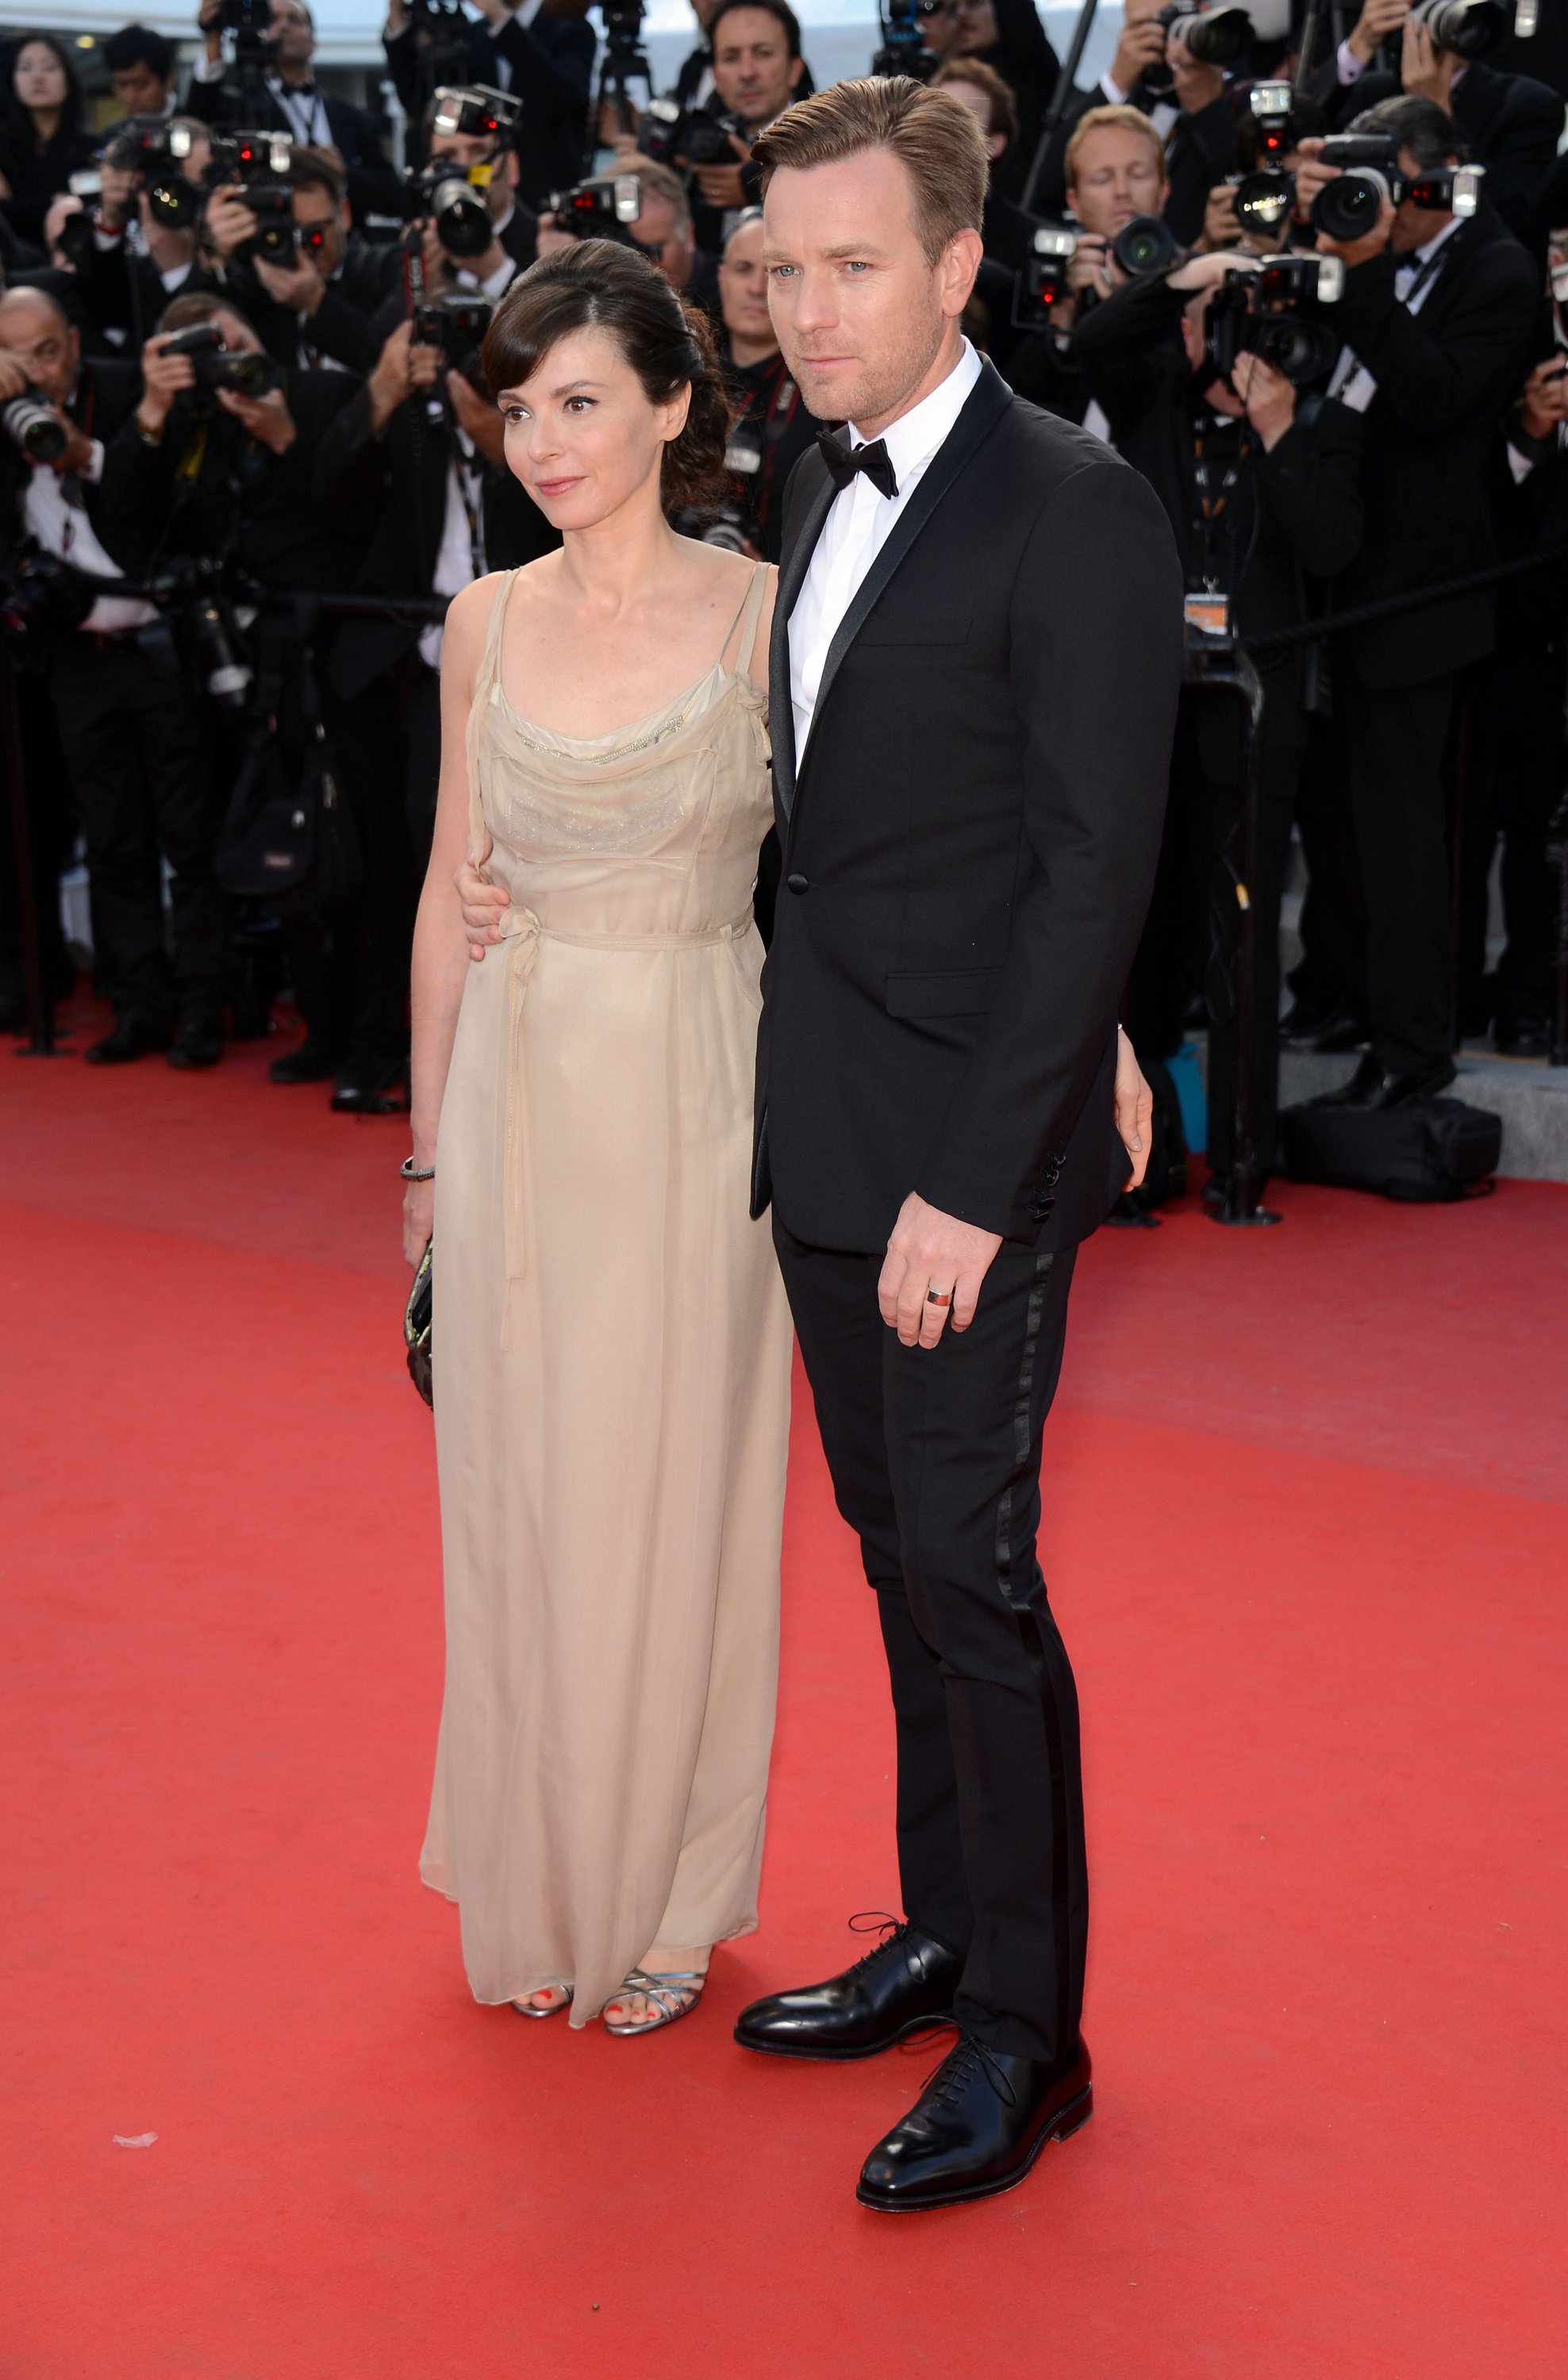 2012-05-23-Cannes-Film-Festival-On-The-Road-Premiere-002.jpg